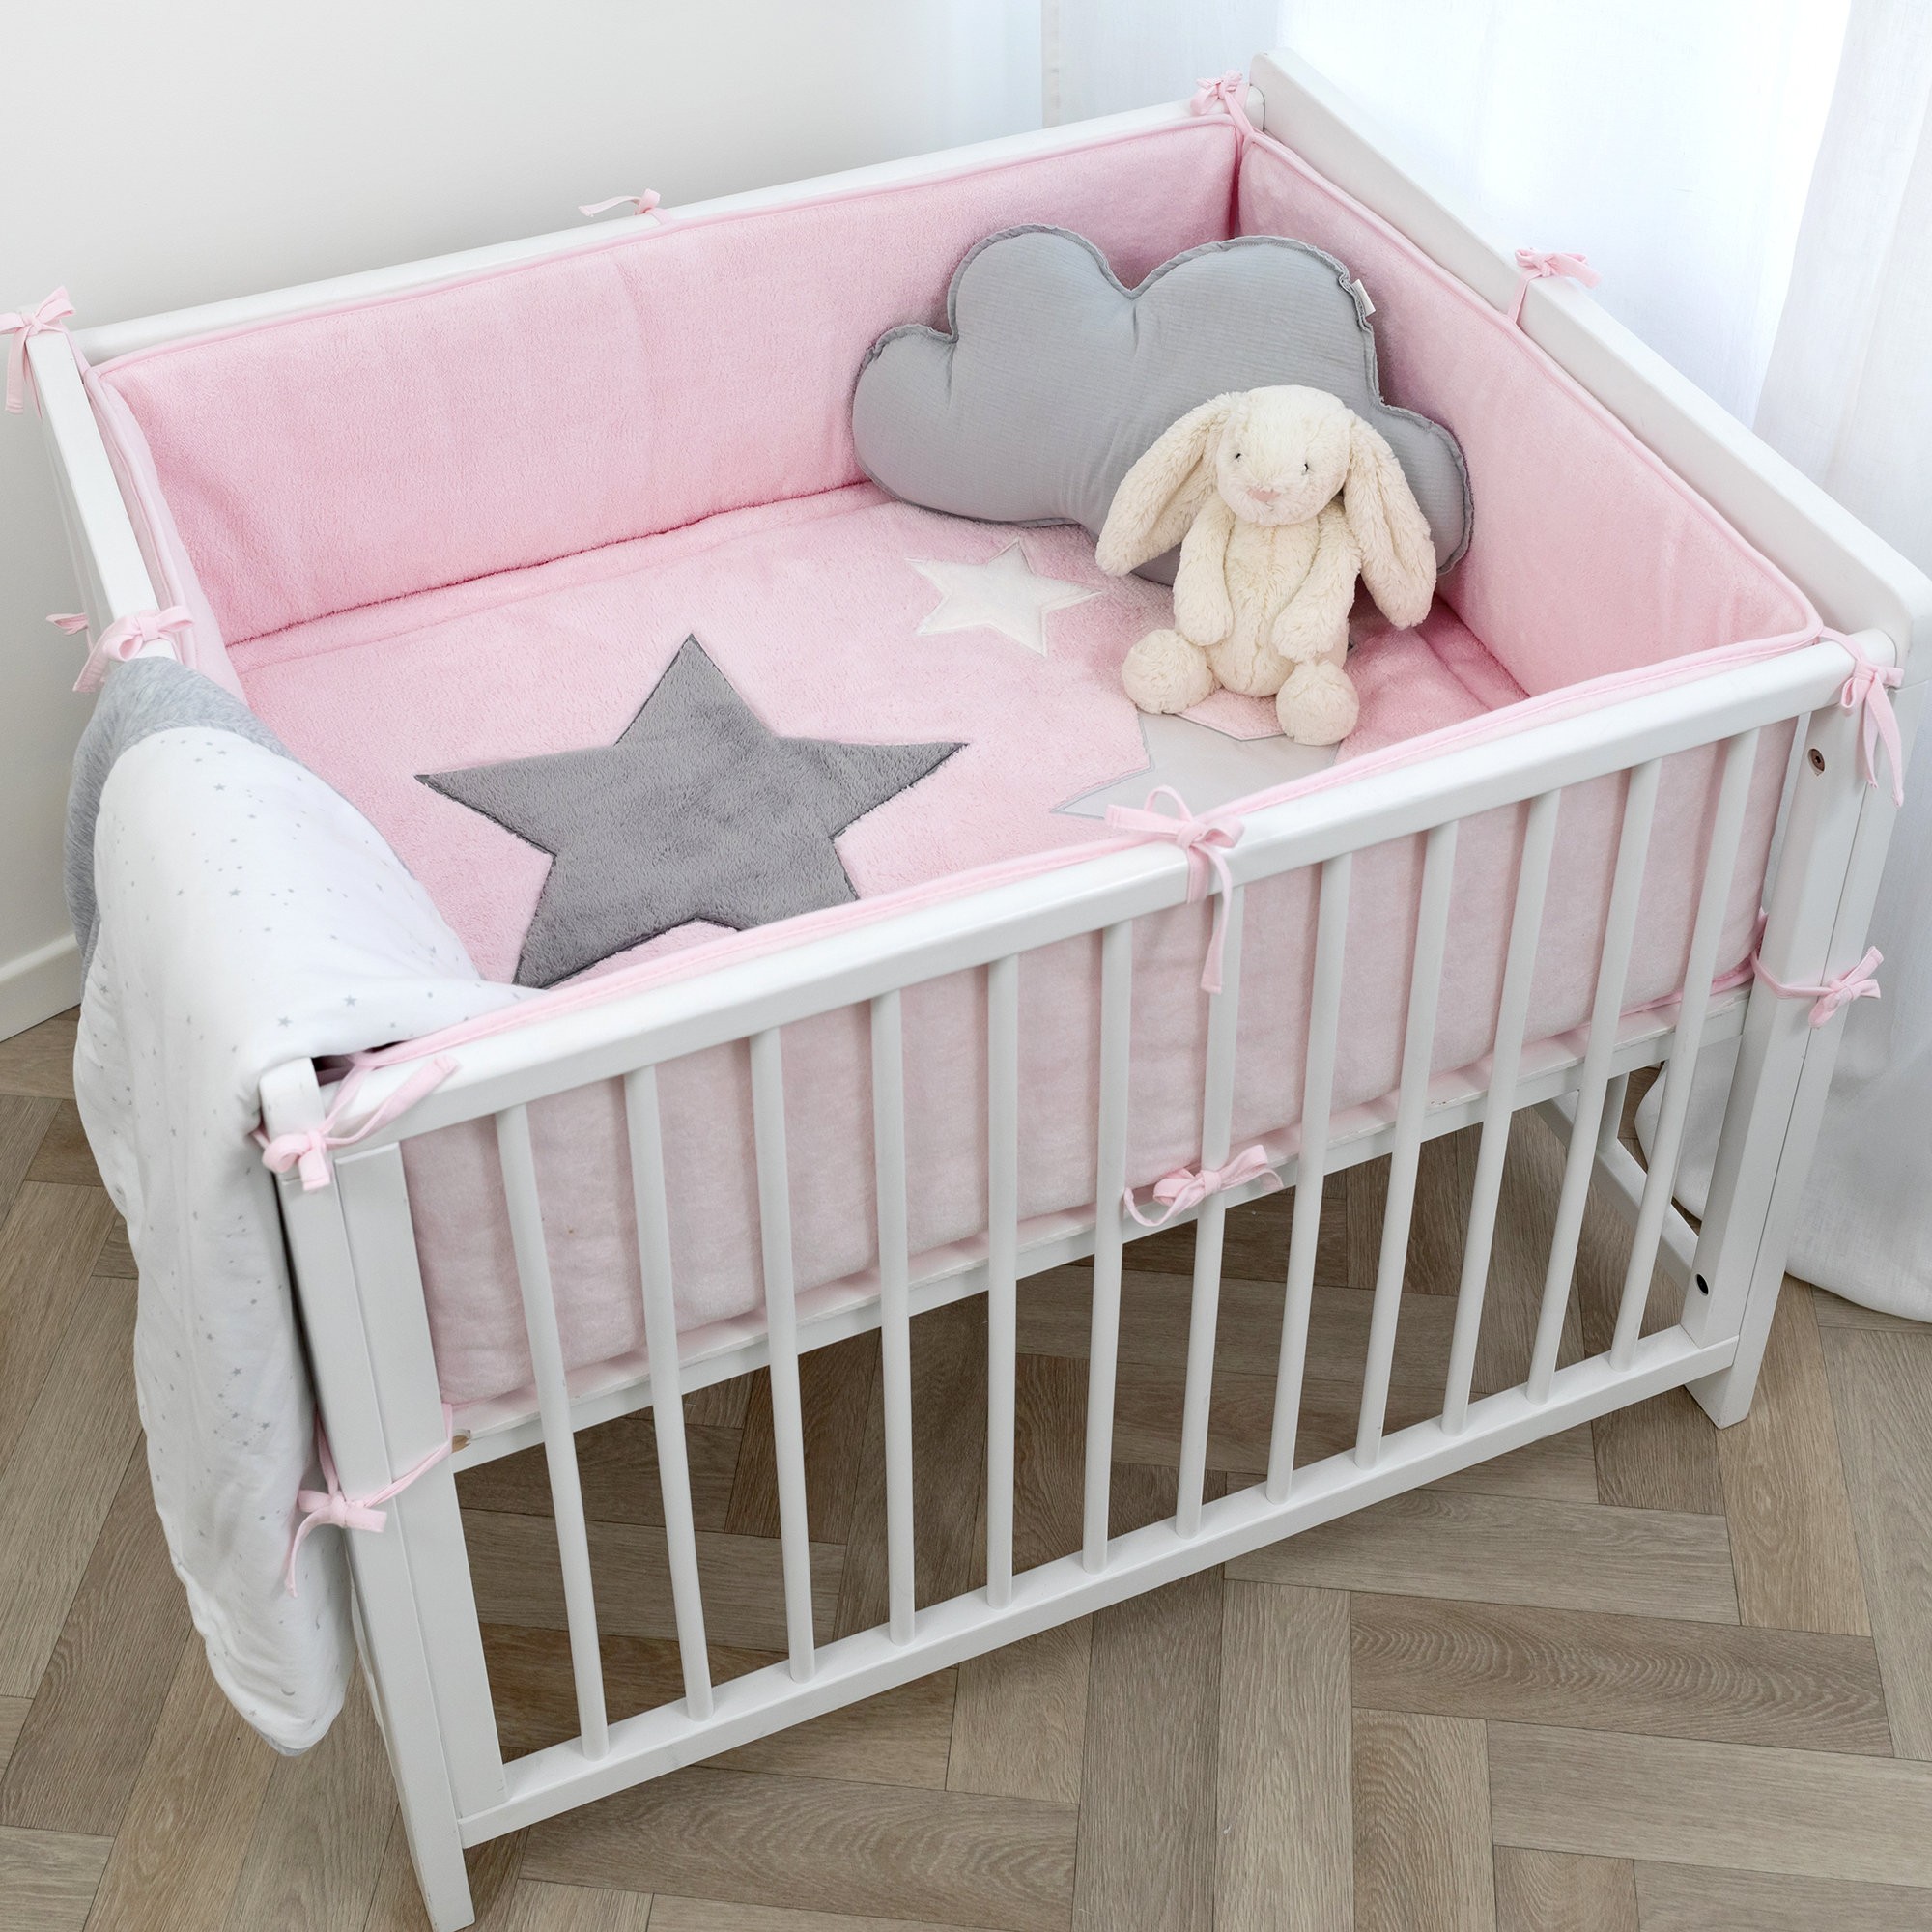 Playpen bumper Pady softy + terry 100x100x28cm  Baby pink[AWARENESS]